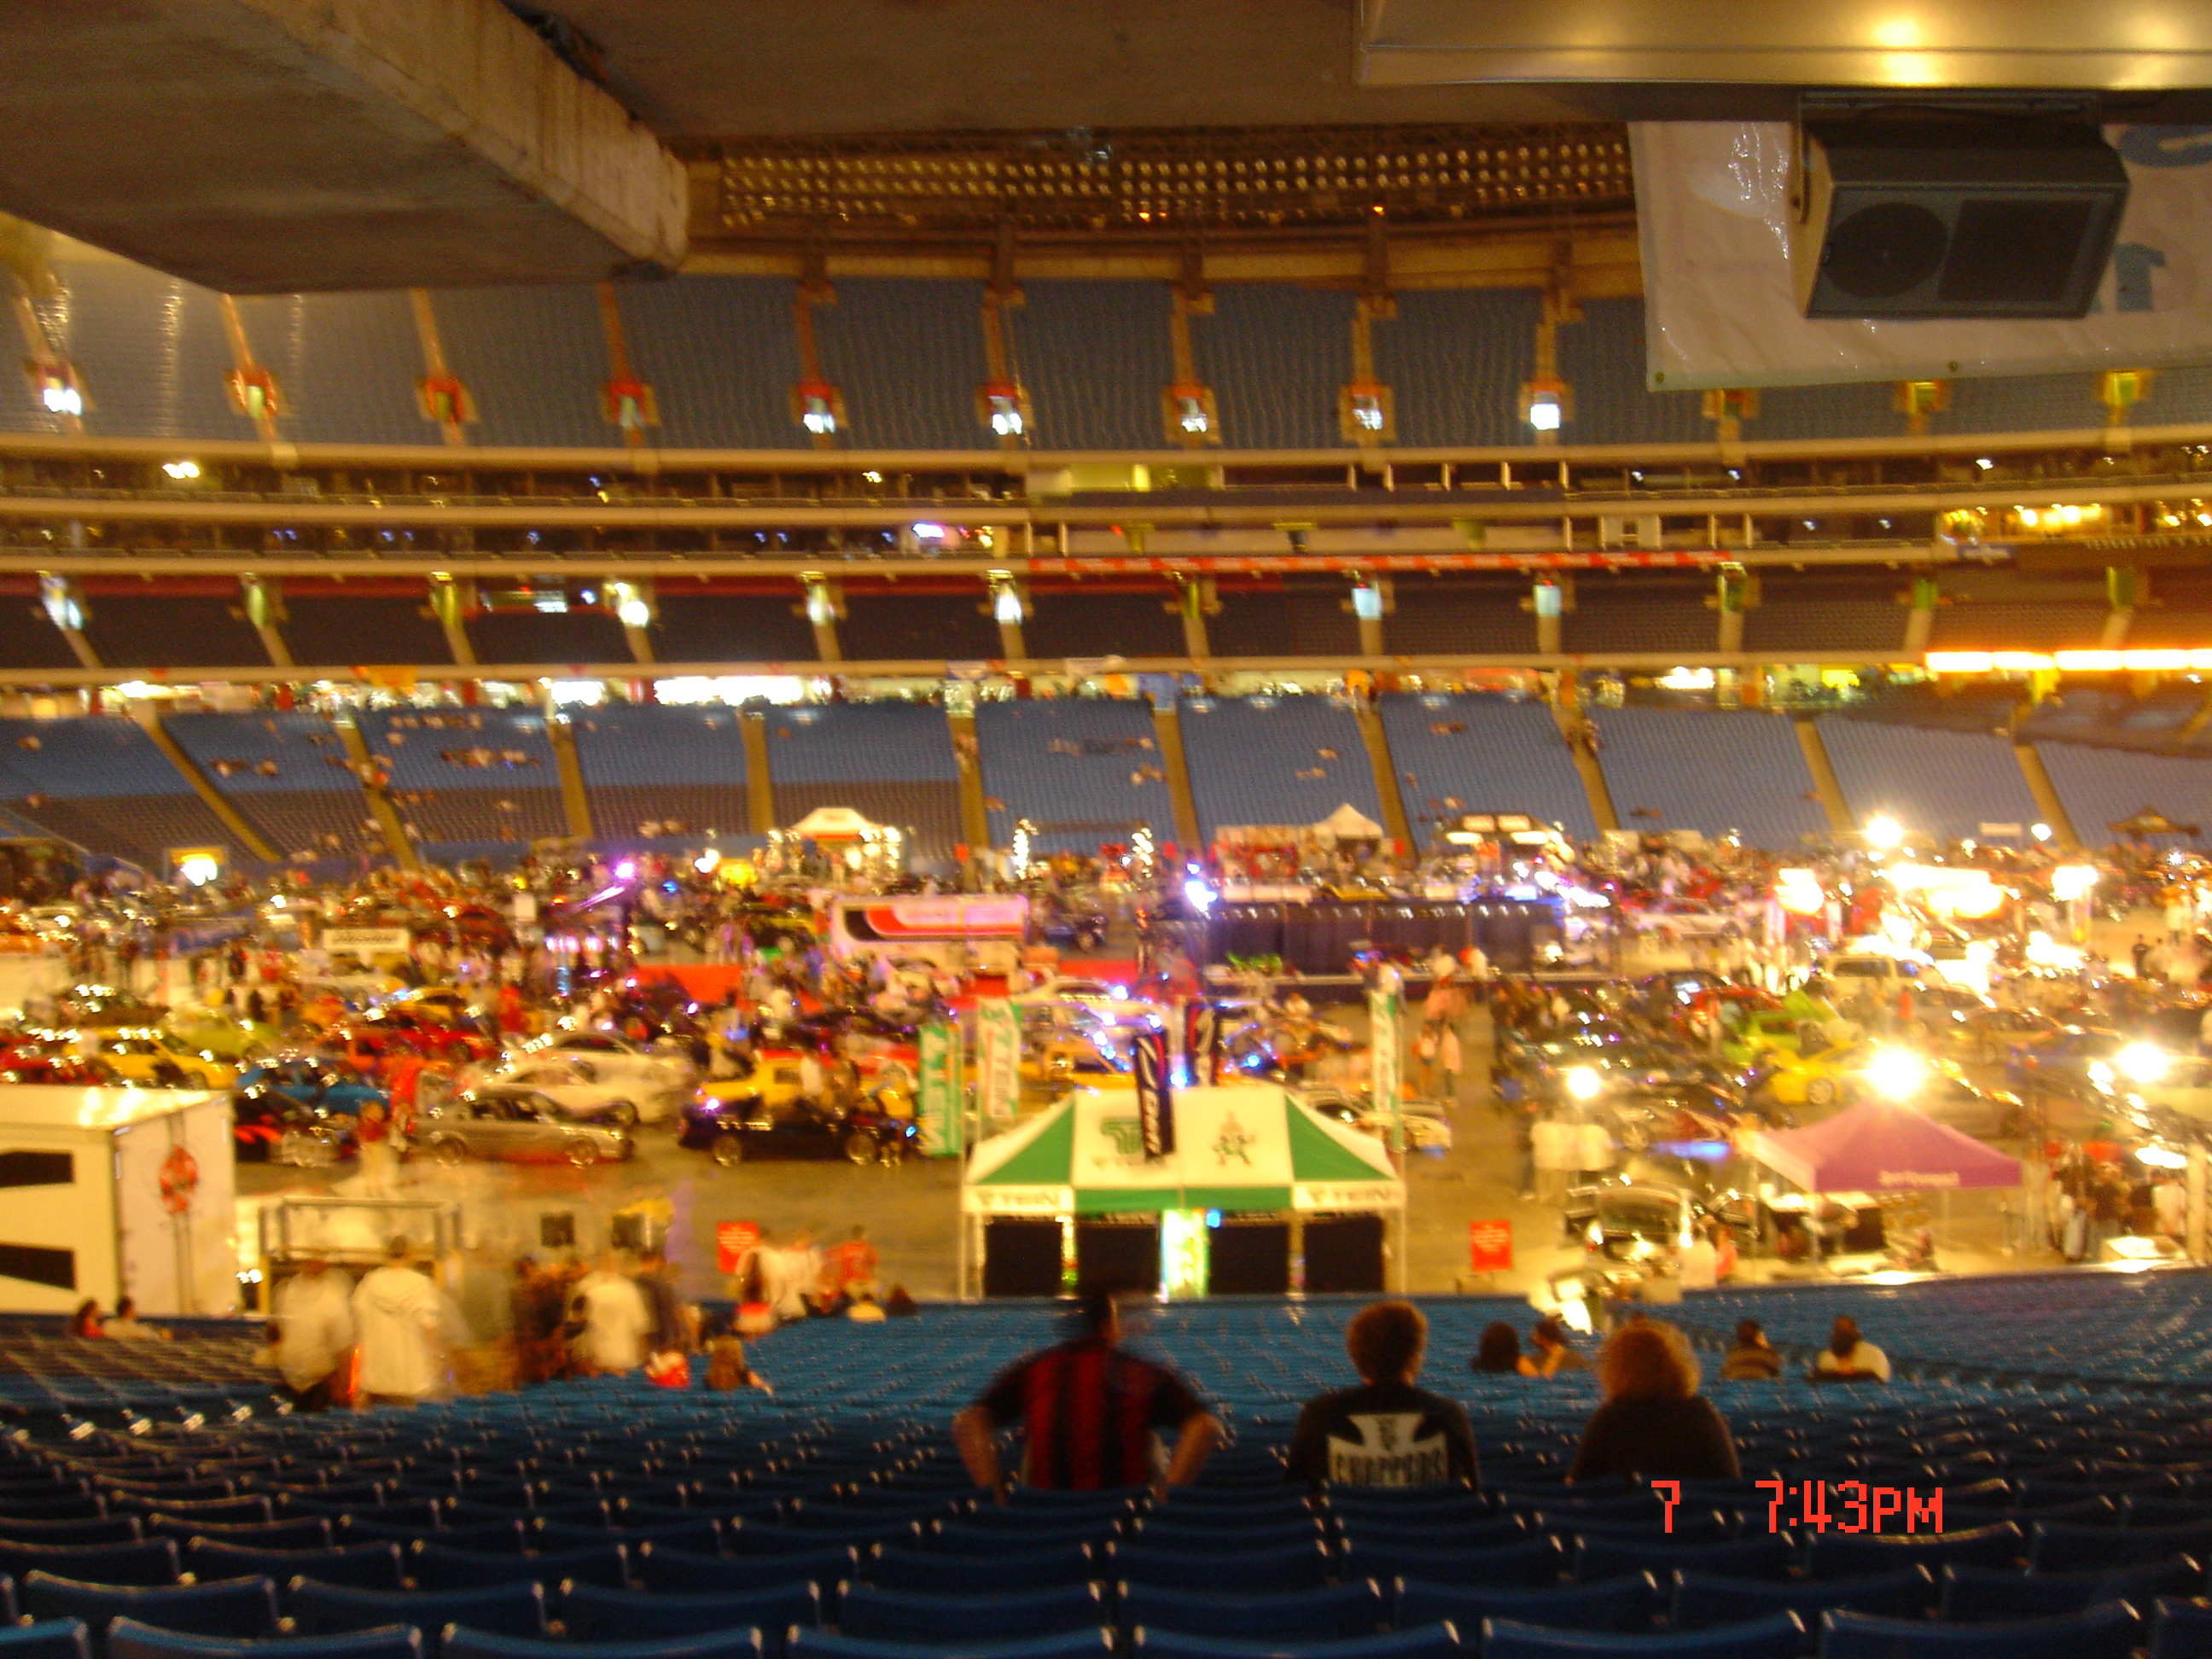 The show field at night time.